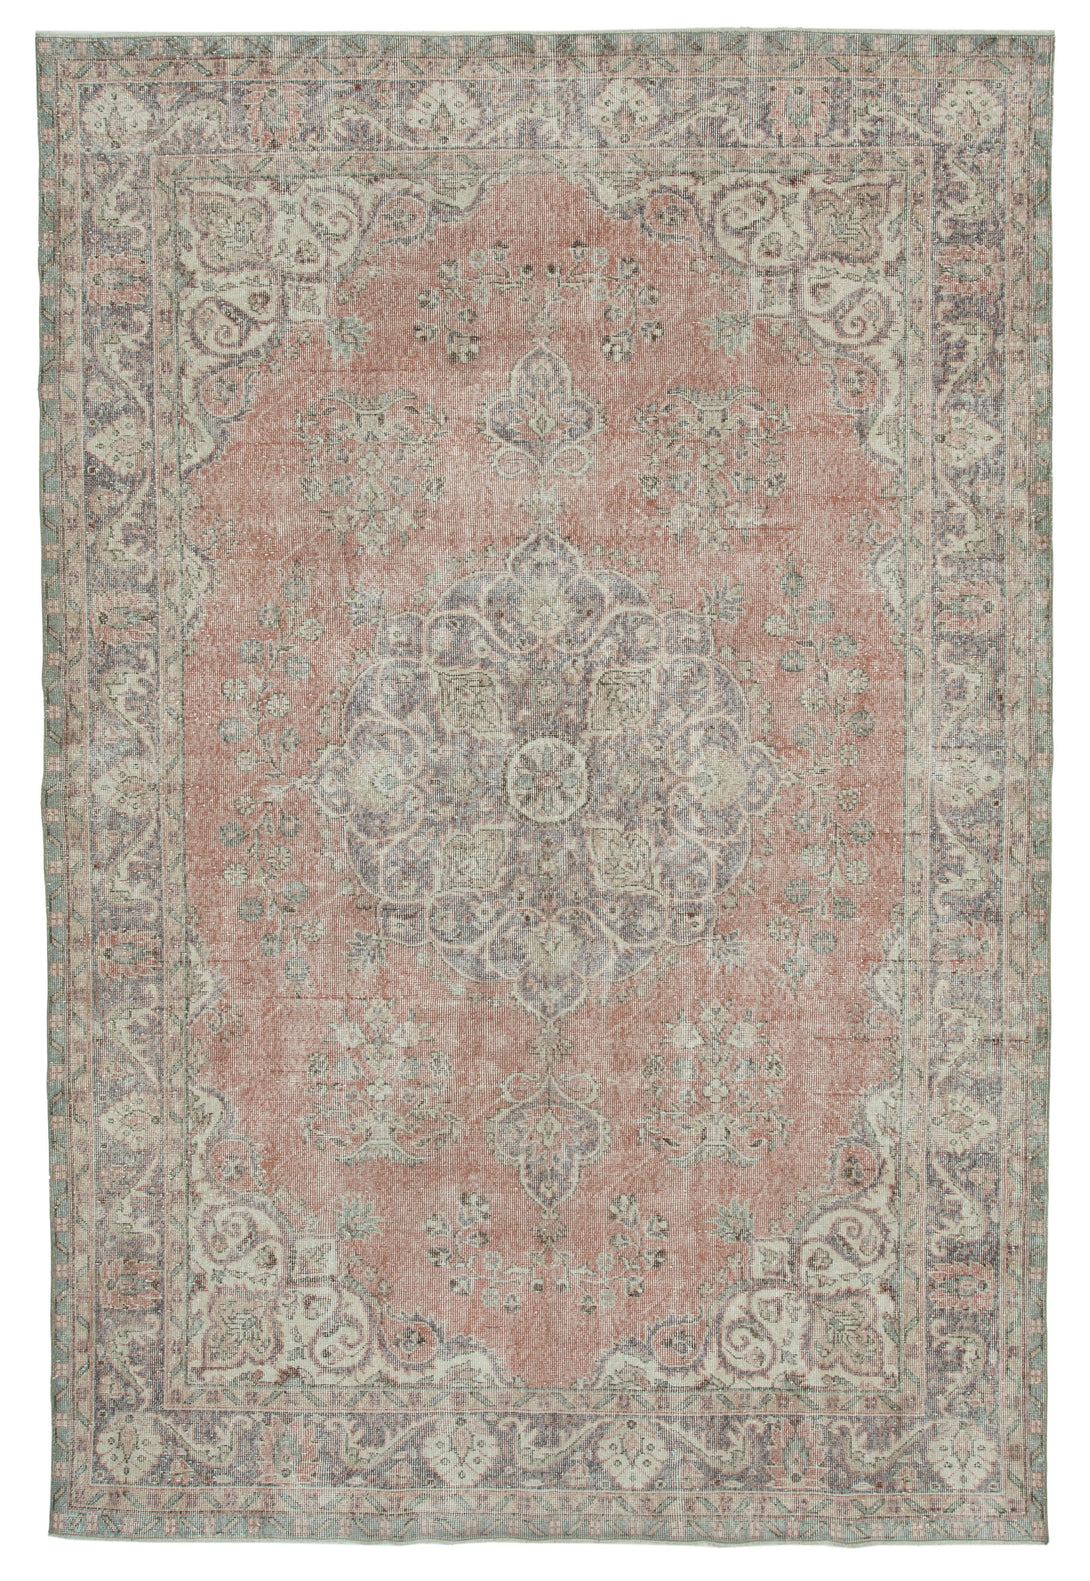 Handmade White Wash Area Rug > Design# OL-AC-34056 > Size: 7'-5" x 11'-2", Carpet Culture Rugs, Handmade Rugs, NYC Rugs, New Rugs, Shop Rugs, Rug Store, Outlet Rugs, SoHo Rugs, Rugs in USA